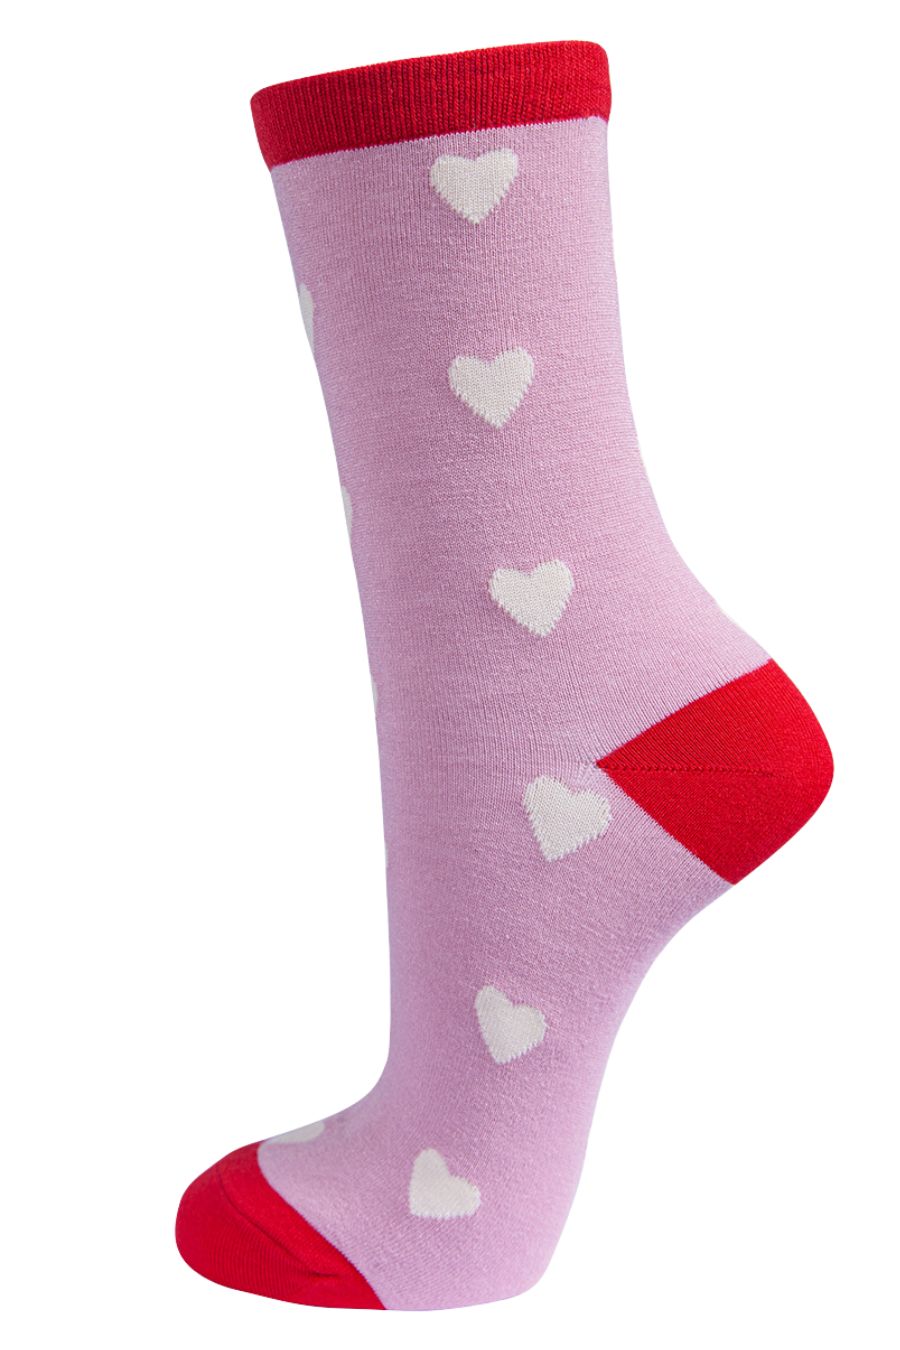 Womens Bamboo Socks Red Love Hearts Novelty Ankle Socks Pink